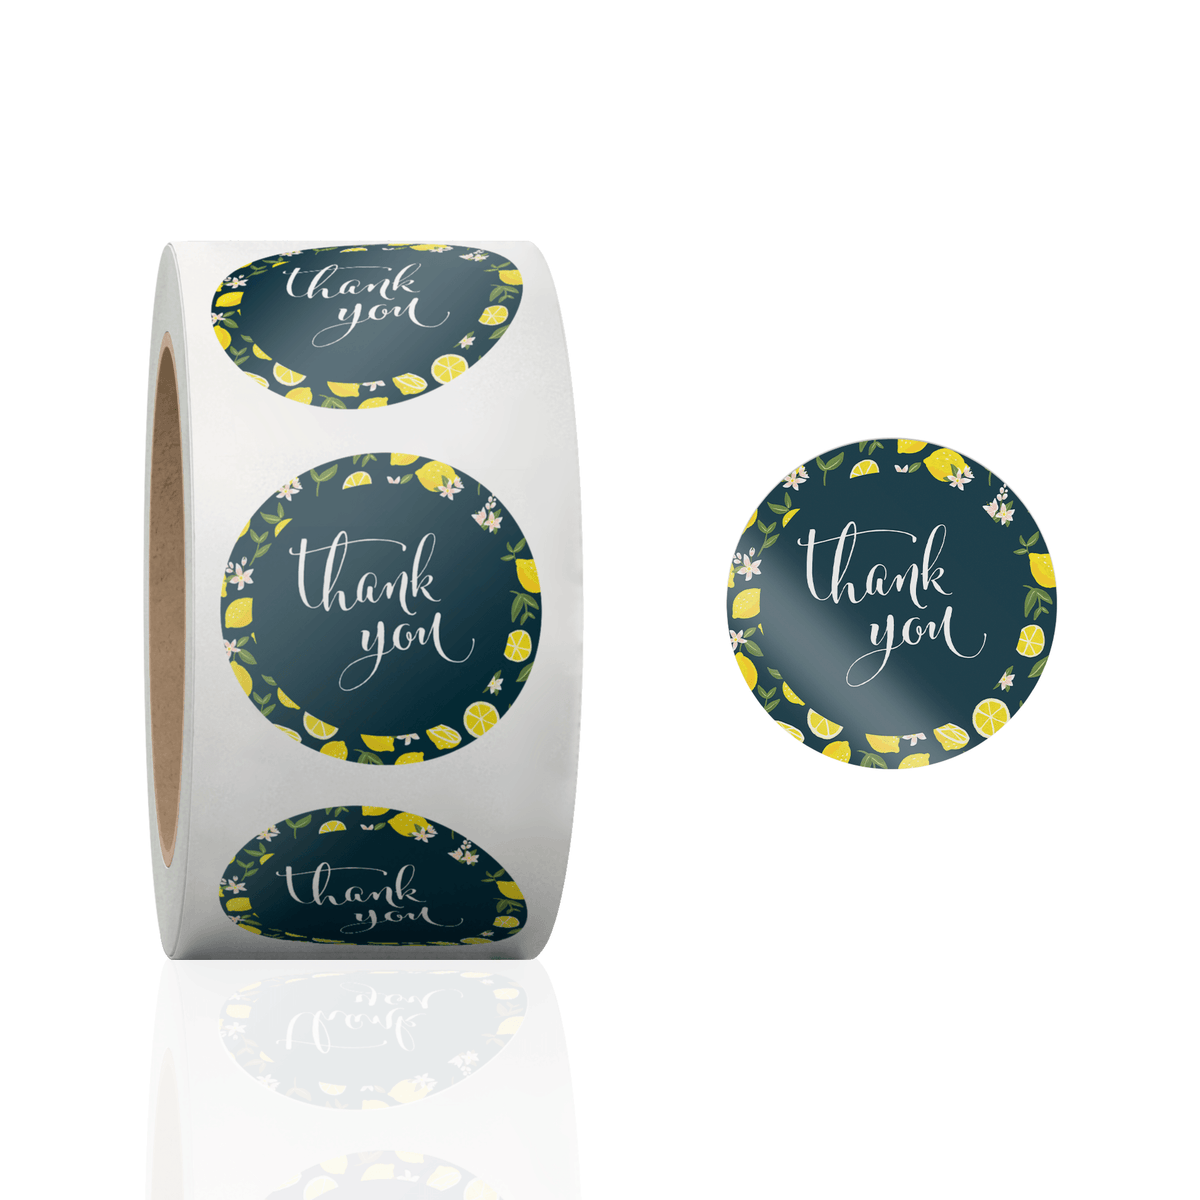 Lemon Gold Foiled Labels, Candle stickers